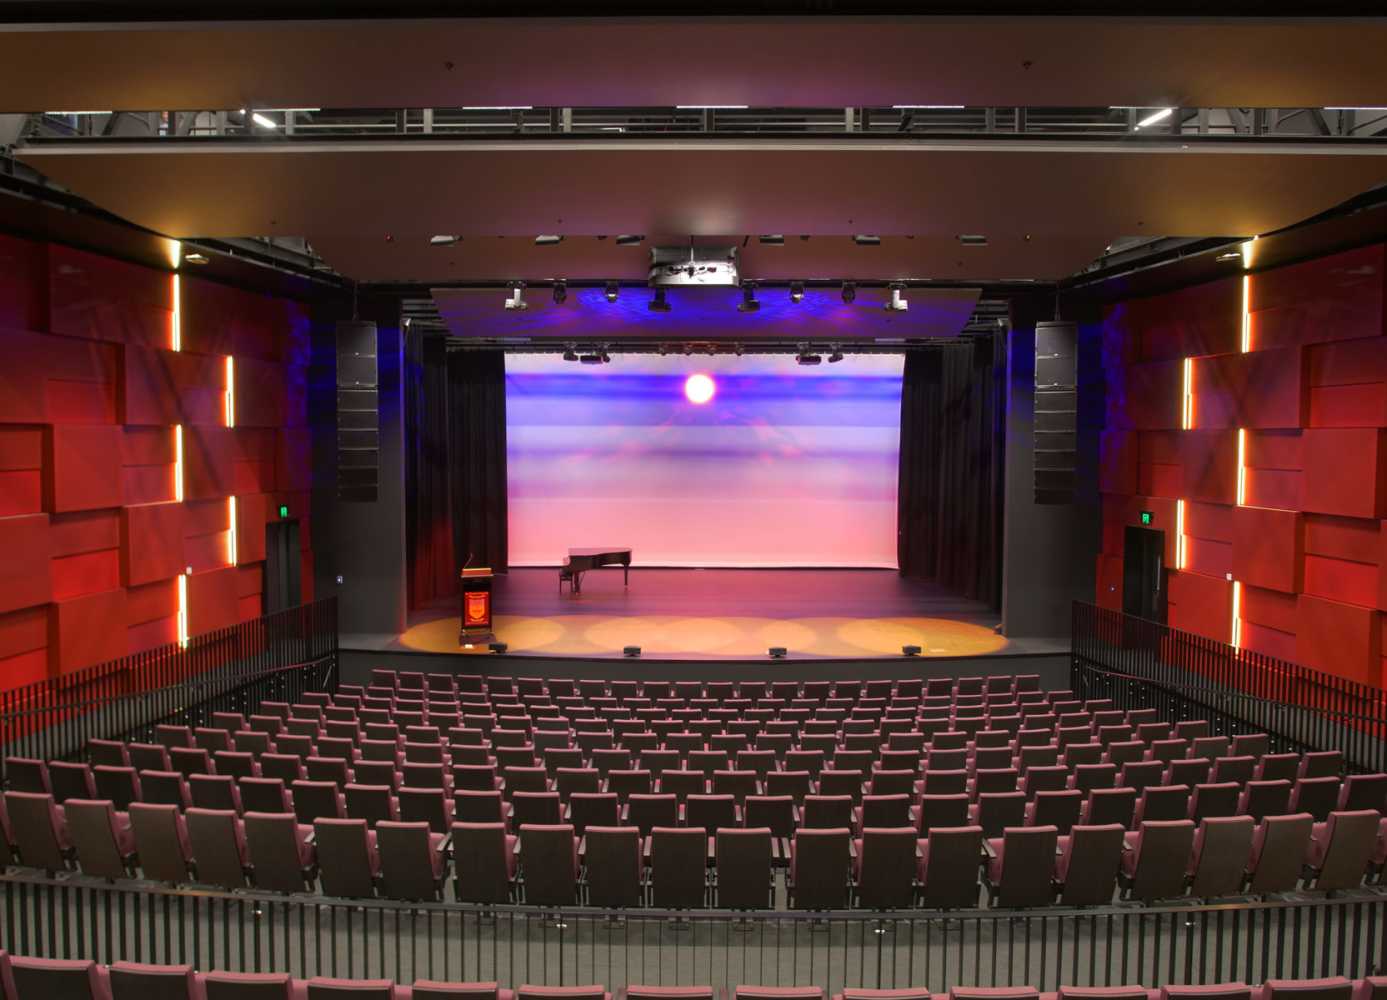 The Geode Centre features a full complement of pro-level AV technology solutions